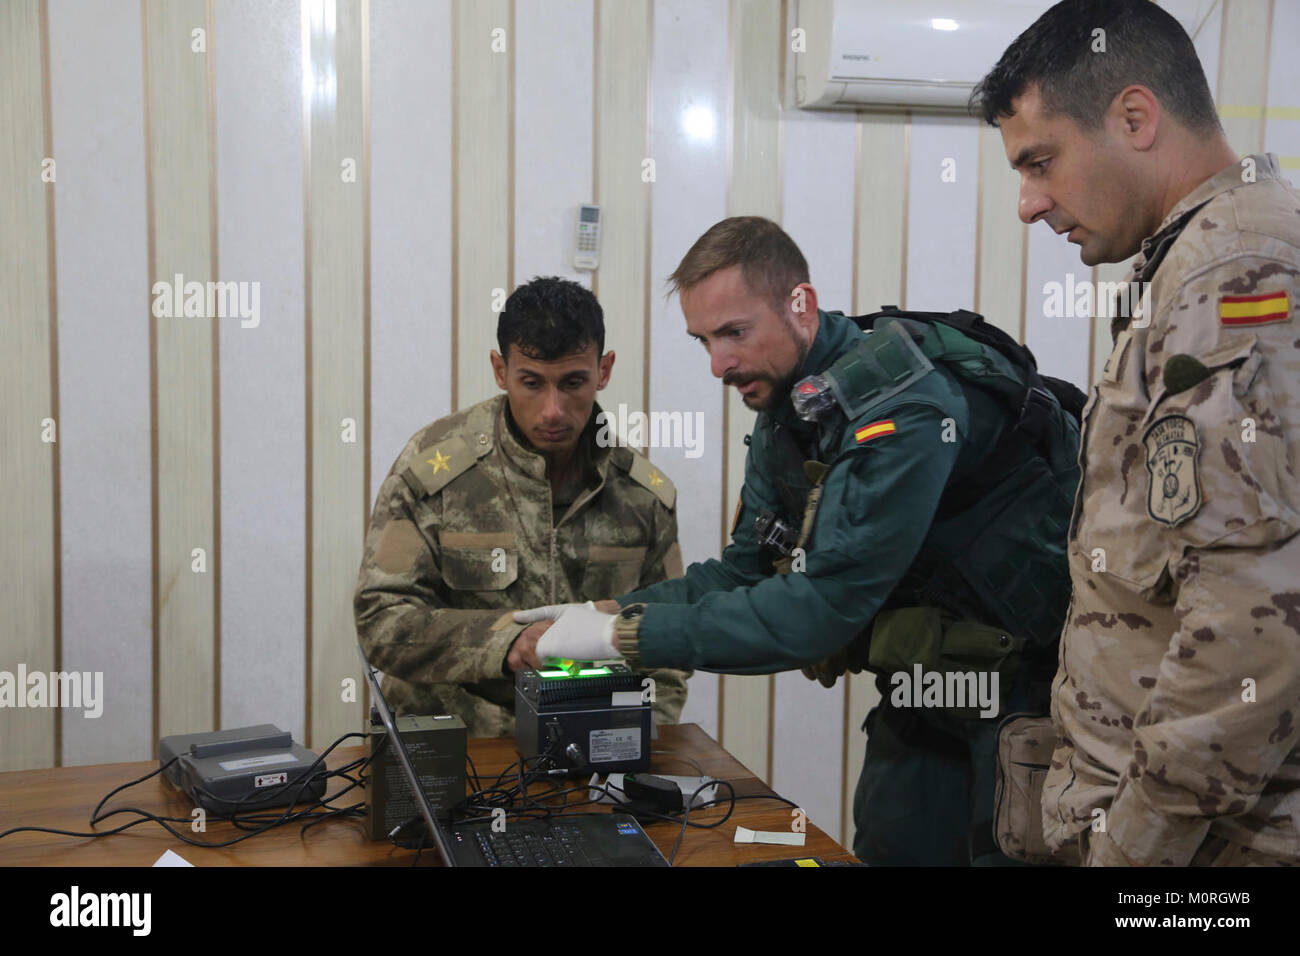 A Spanish Guardia Civil Coalition member takes an Iraqi soldier’s fingerprints to process him into the system during filiation at Camp Besmaya Jan. 3, 2018.  The Coalition enables its partners through the build partner capacity mission to provide security and stability. Combined Joint Task Force - Operation Inherent Resolve is the global Coalition to defeat ISIS in Iraq and Syria.  (U.S. Army Stock Photo